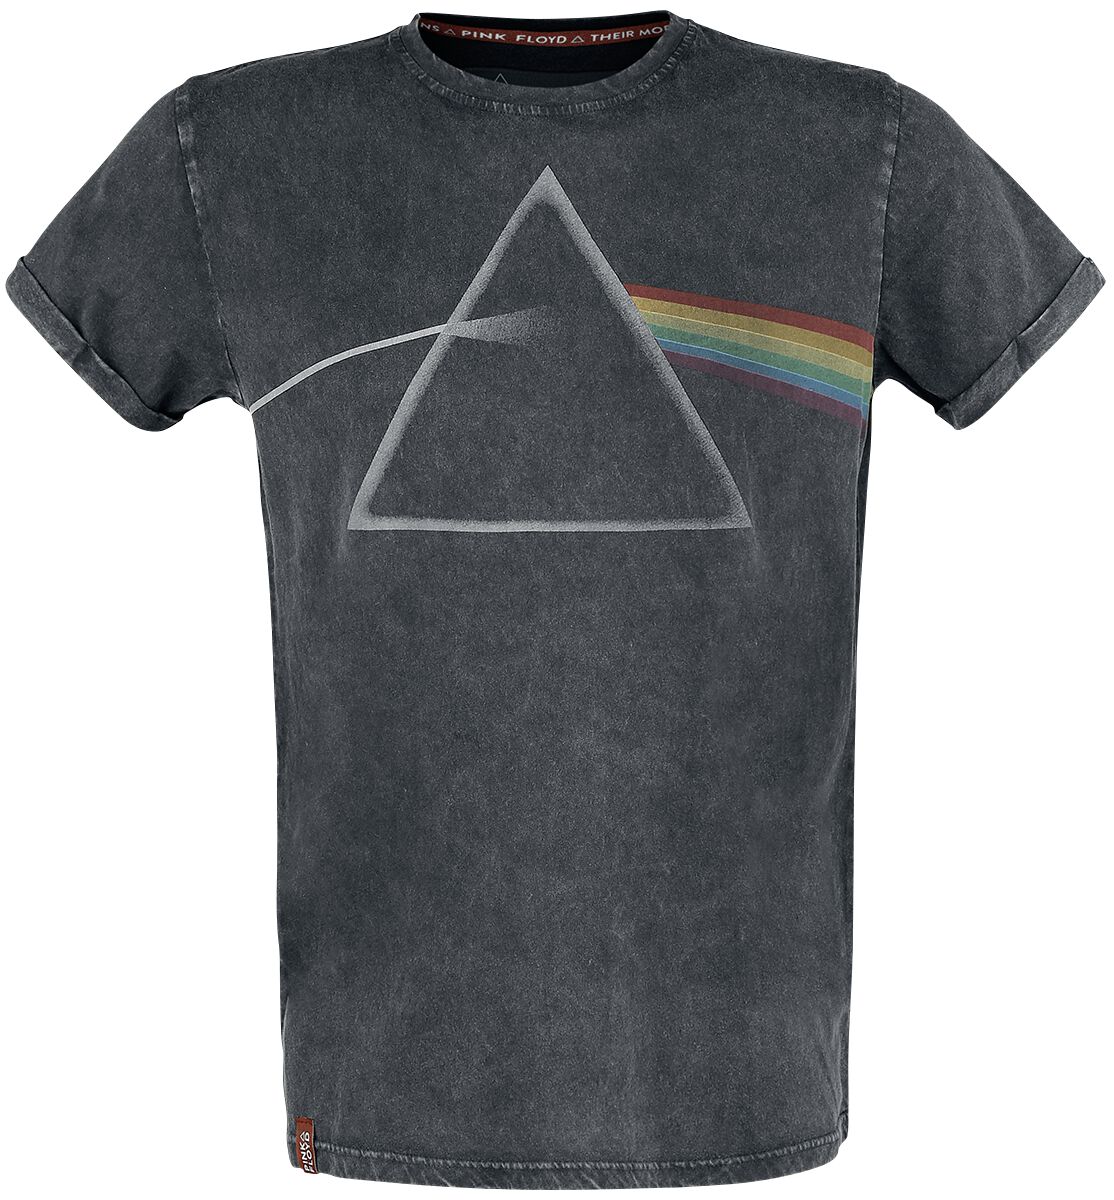 Image of T-Shirt di Pink Floyd - EMP Signature Collection - M a 3XL - Uomo - antracite